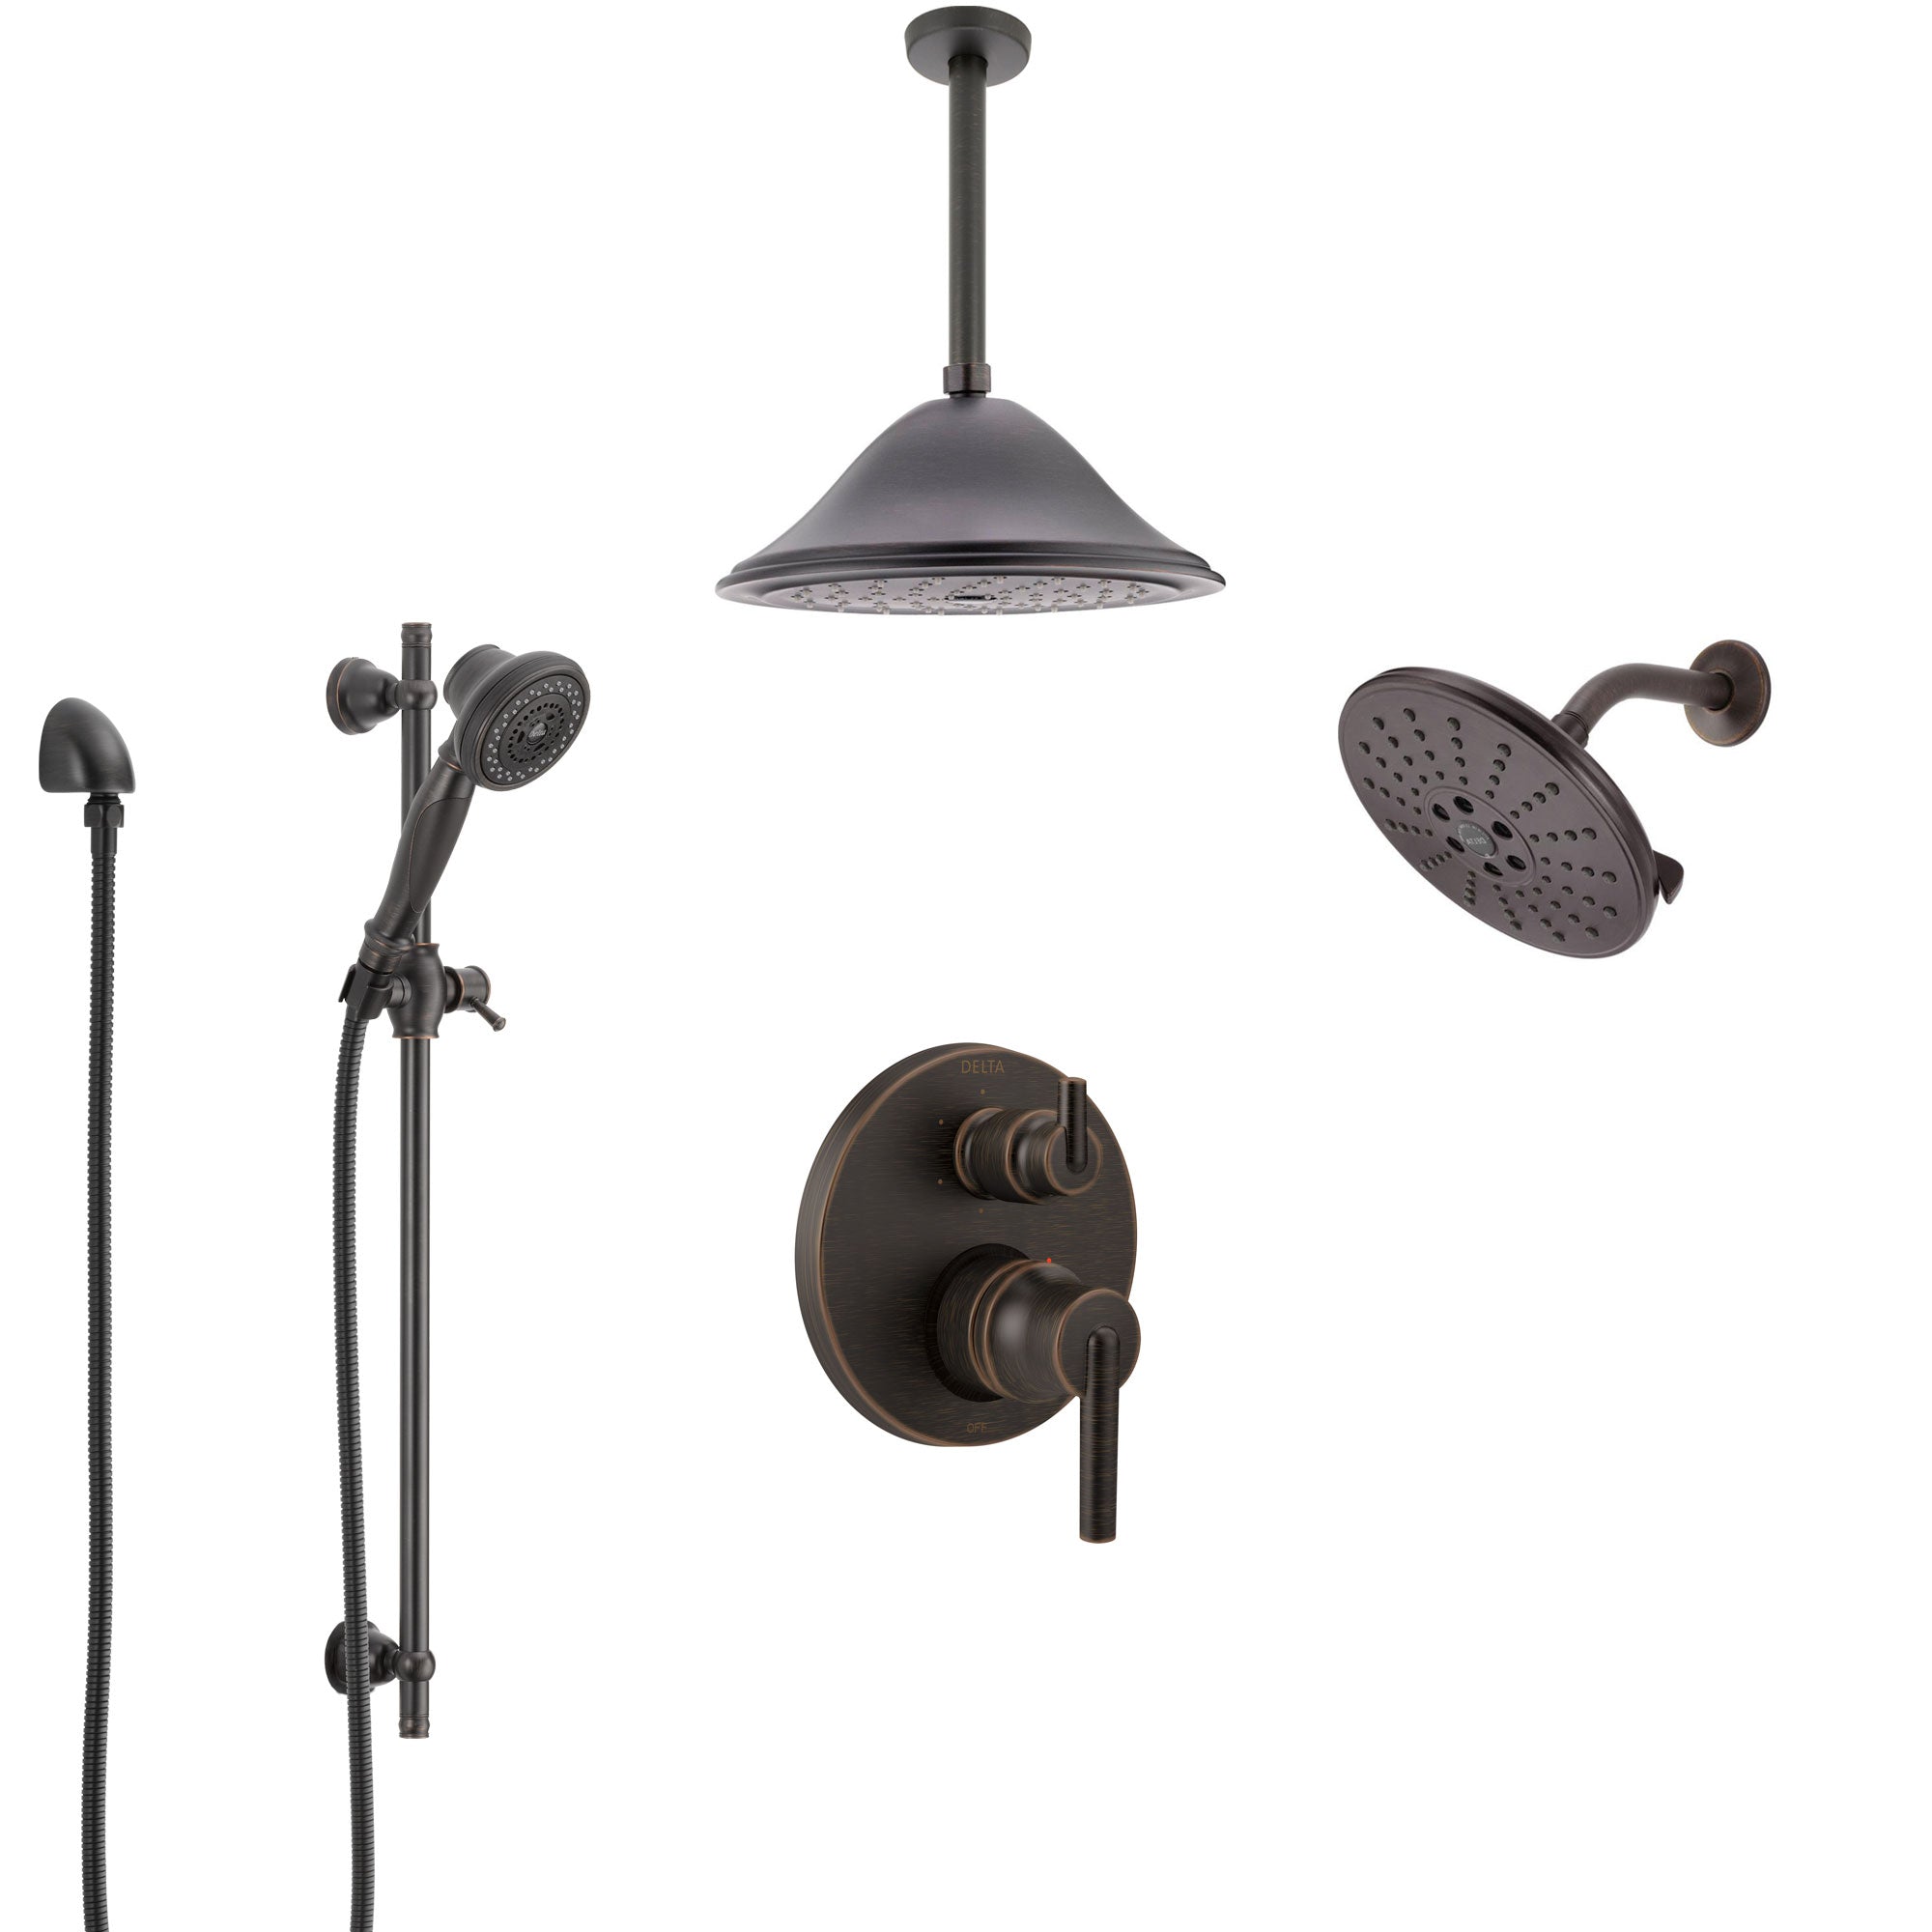 Delta Trinsic Venetian Bronze Shower System with Control Handle, Integrated Diverter, Showerhead, Ceiling Mount Showerhead, and Hand Shower SS24959RB6